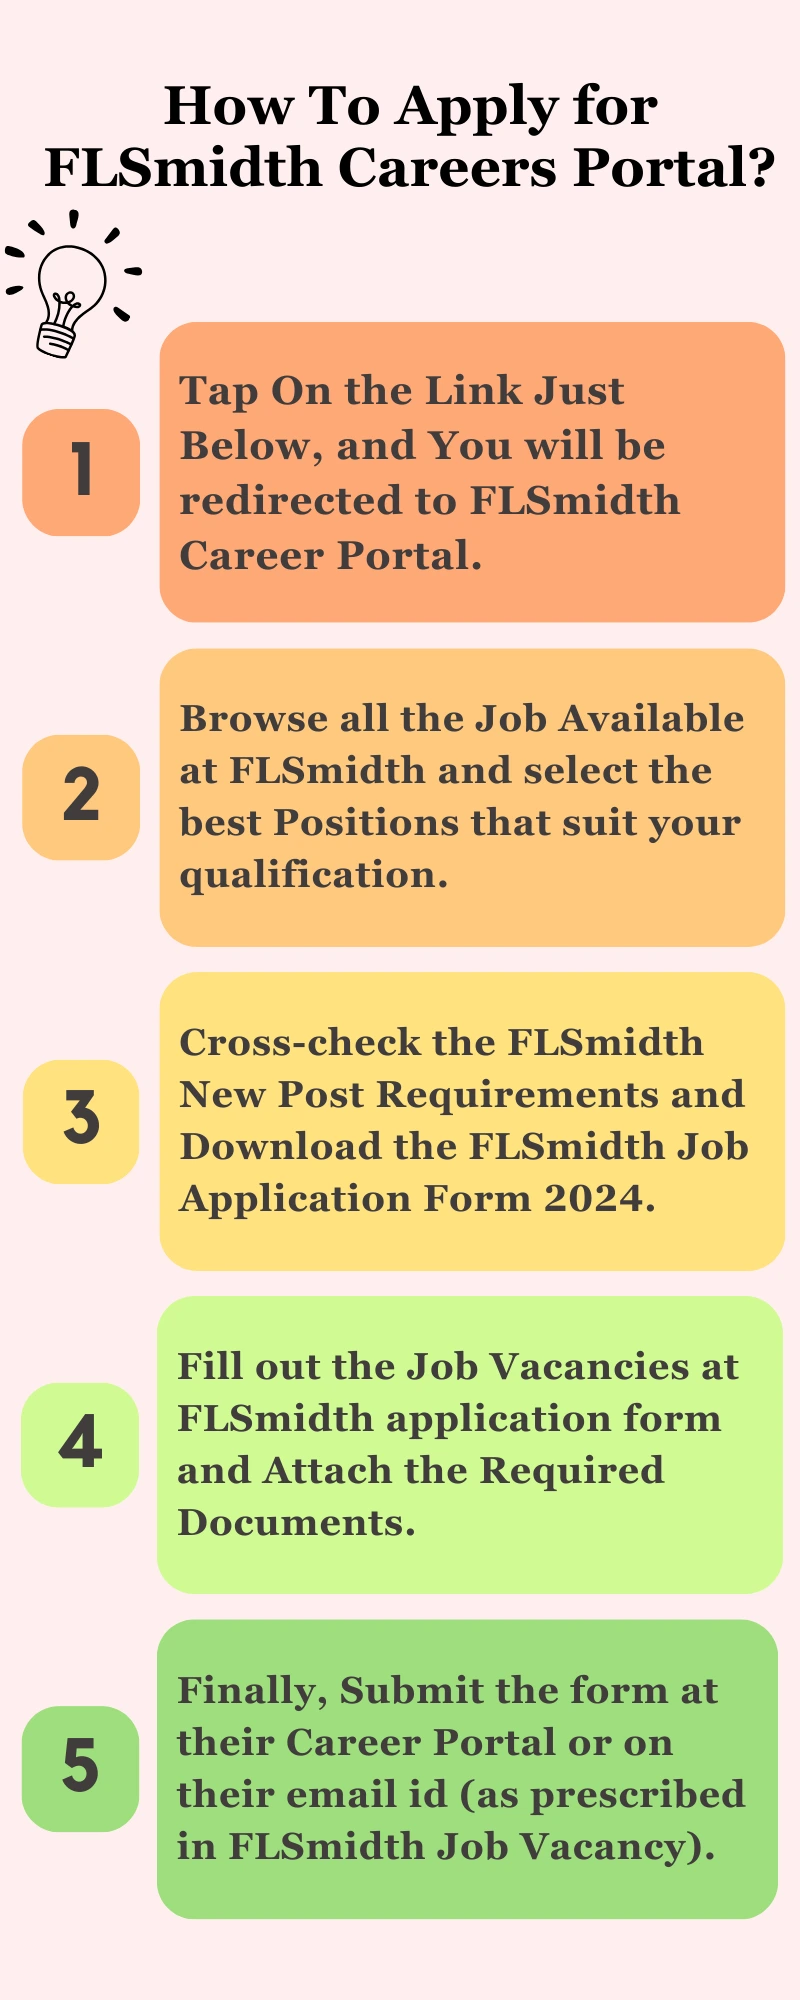 How To Apply for FLSmidth Careers Portal?